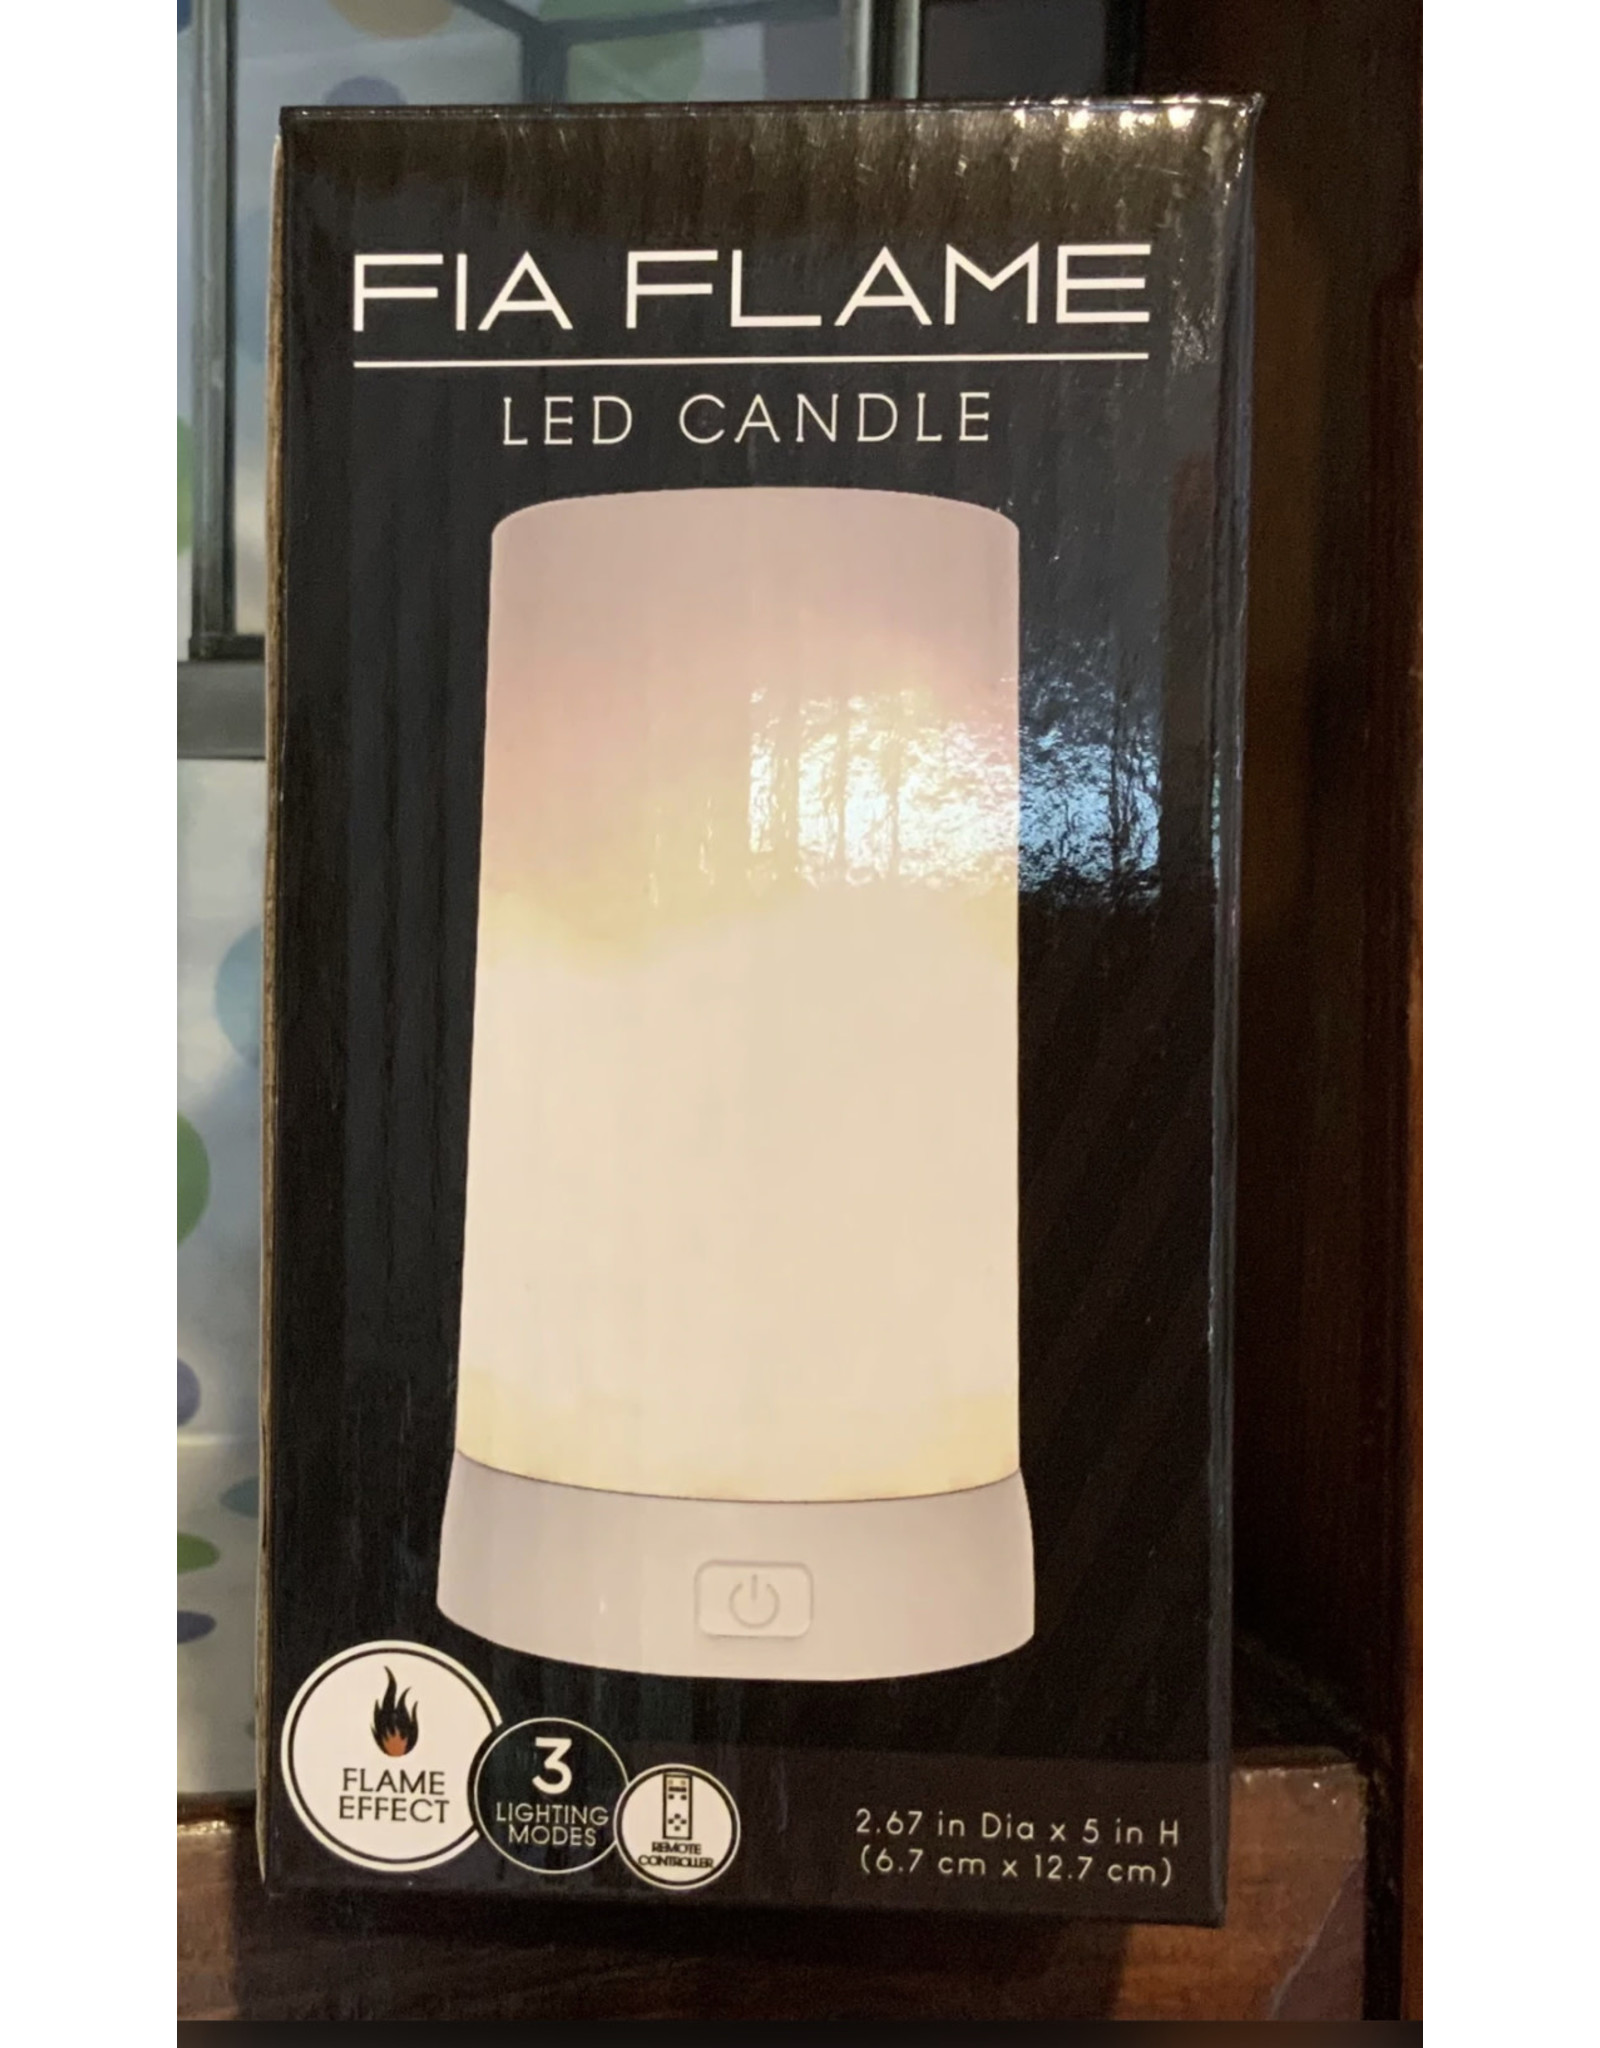 Fia Flame LED Flame Candle w/Timer & Charger Cool